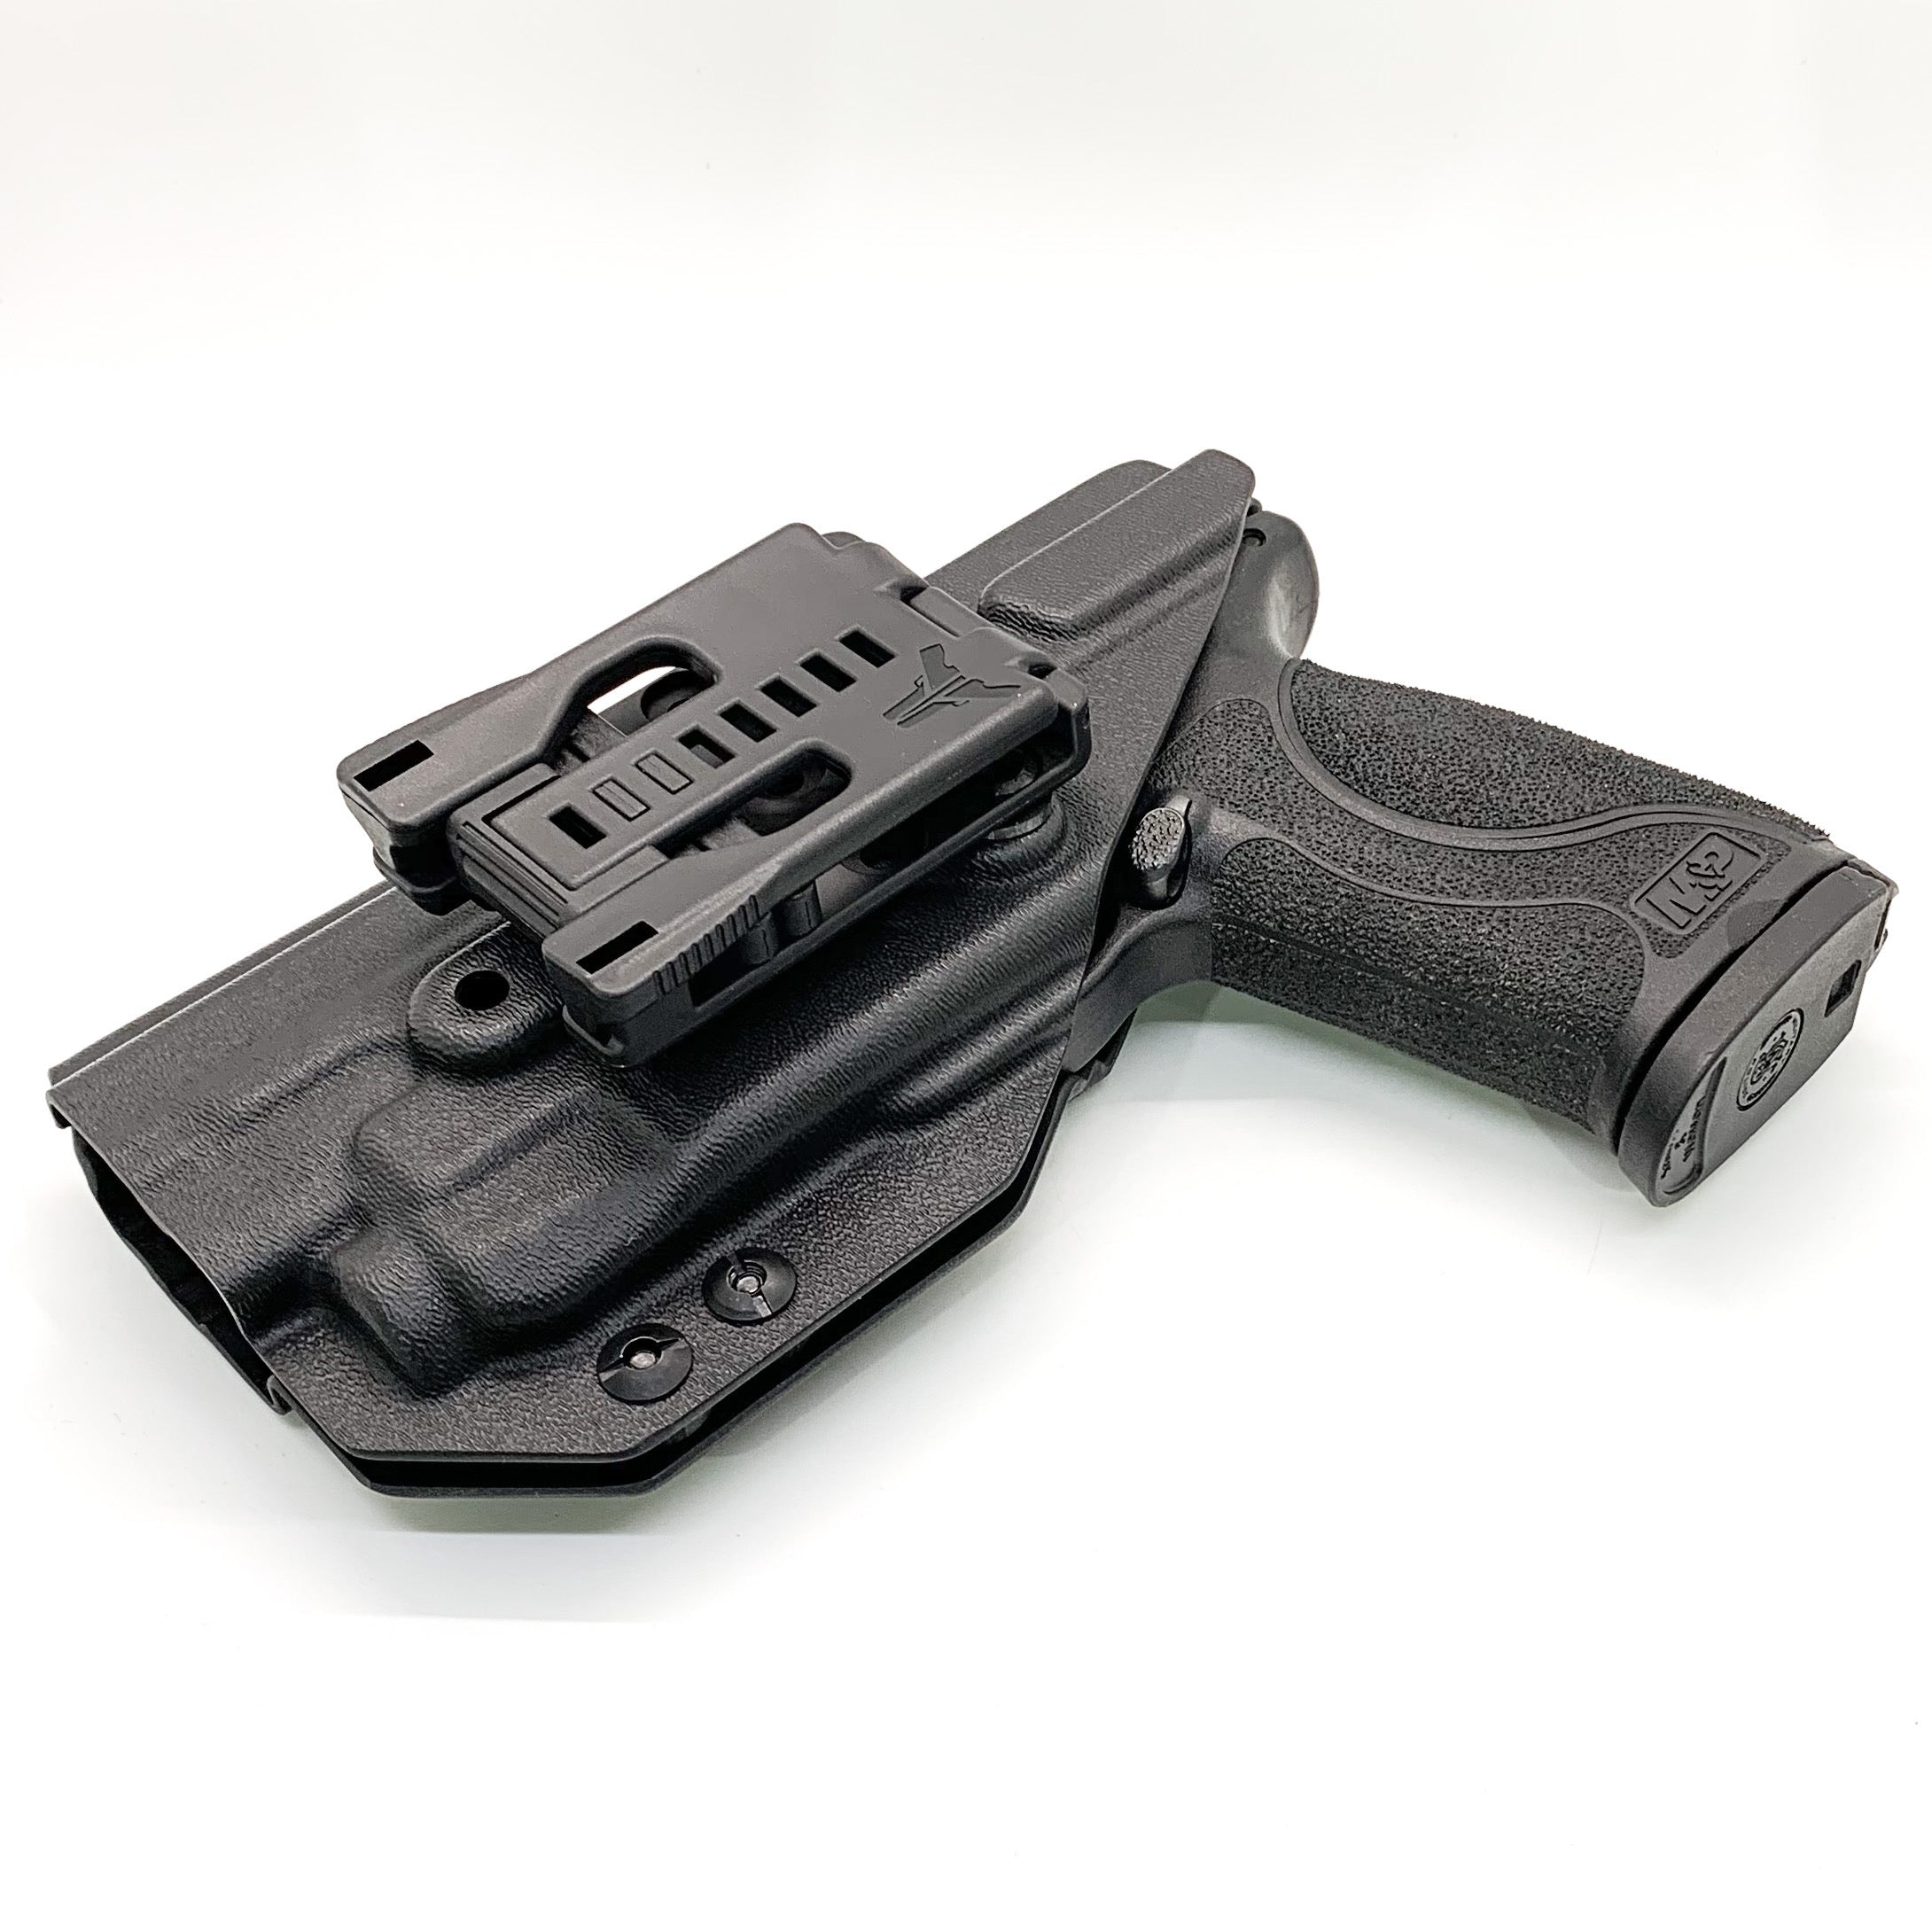 For the best, Outside Waistband OWB Kydex Taco Holster designed to fit the Smith & Wesson M&P 4" 10mm M2.0 pistol with thumb safety & TLR-7, TLR-7A or TLR-7X handgun, shop Four Brothers Holsters.  Full sweat guard, adjustable retention, profiled for a red dot sight.  Made in the USA for veterans and law enforcement.